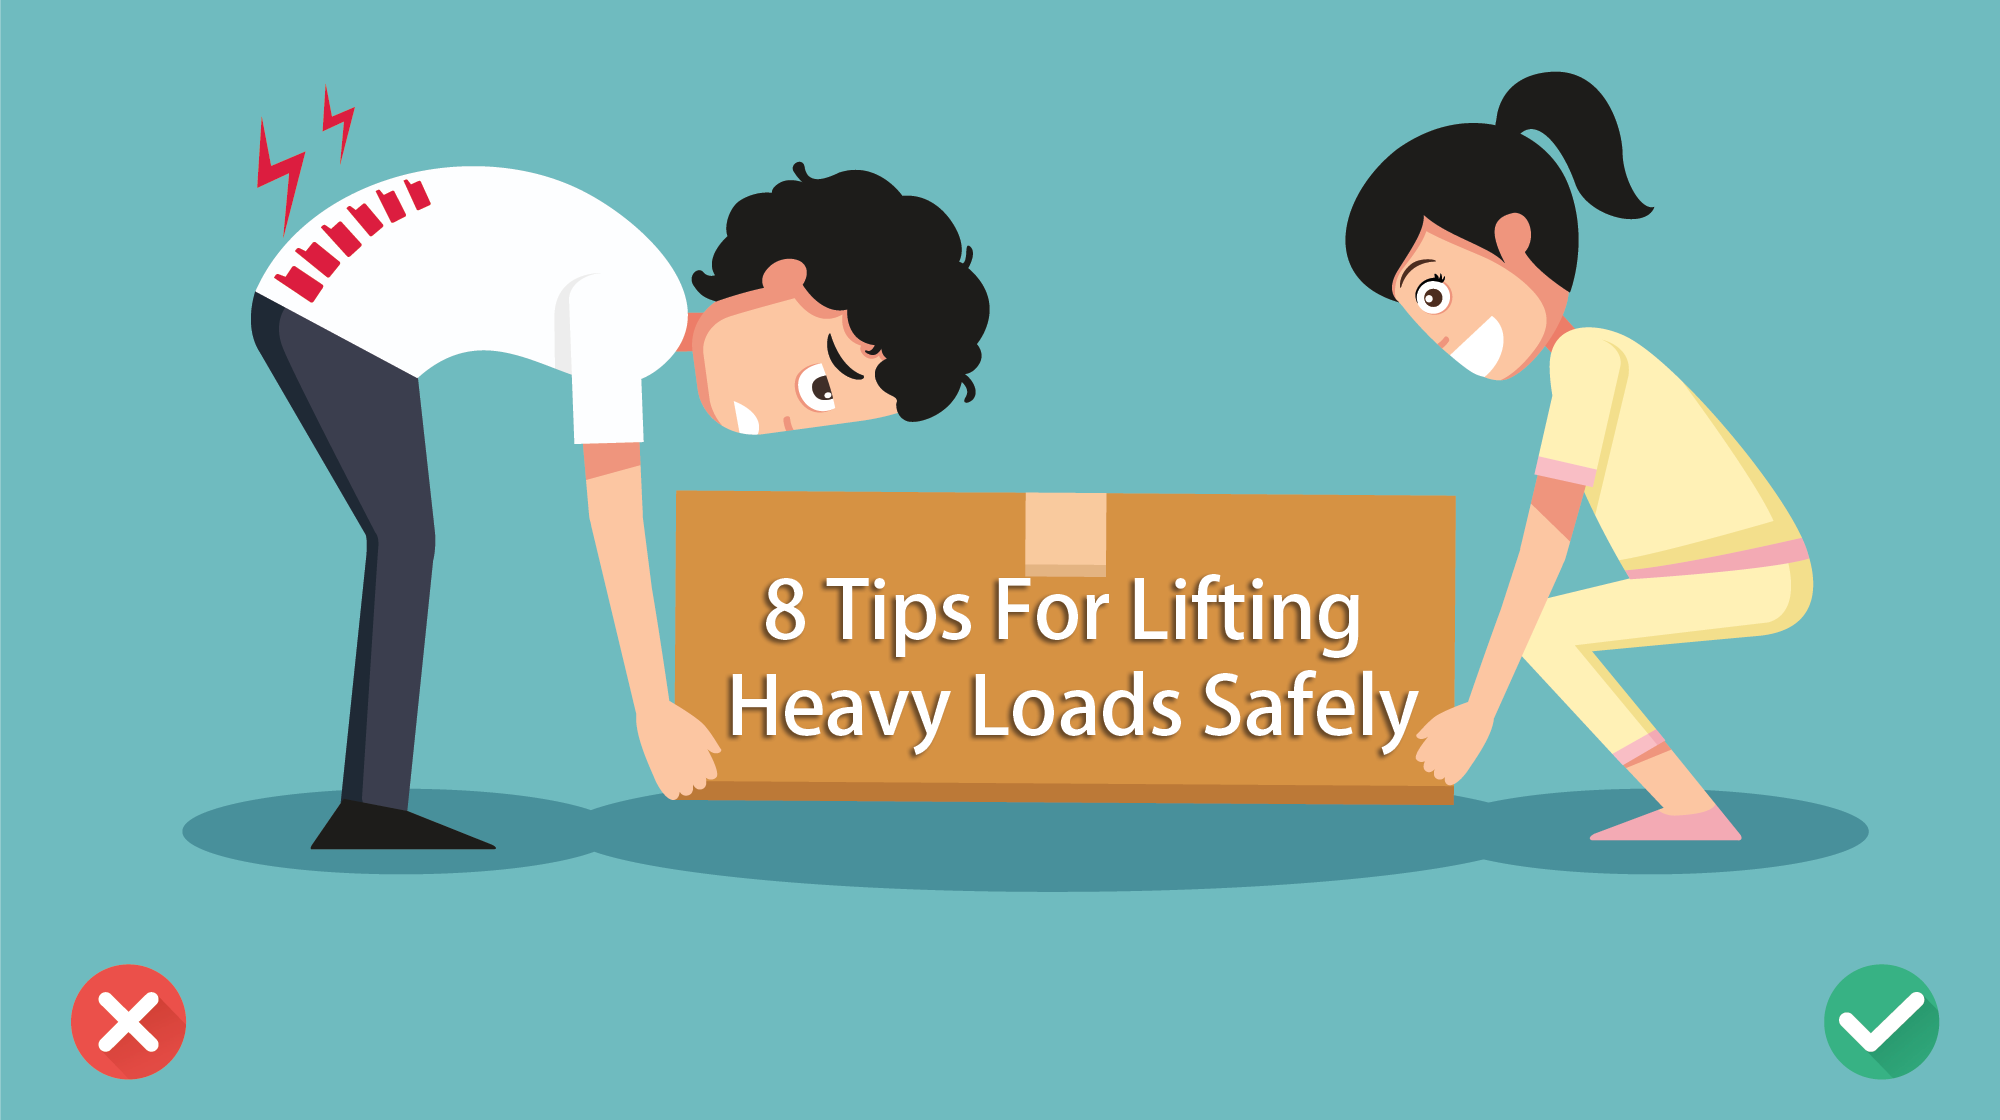 Save Your Spine 8 Tips For Lifting Heavy Loads Safely Samson Tiara